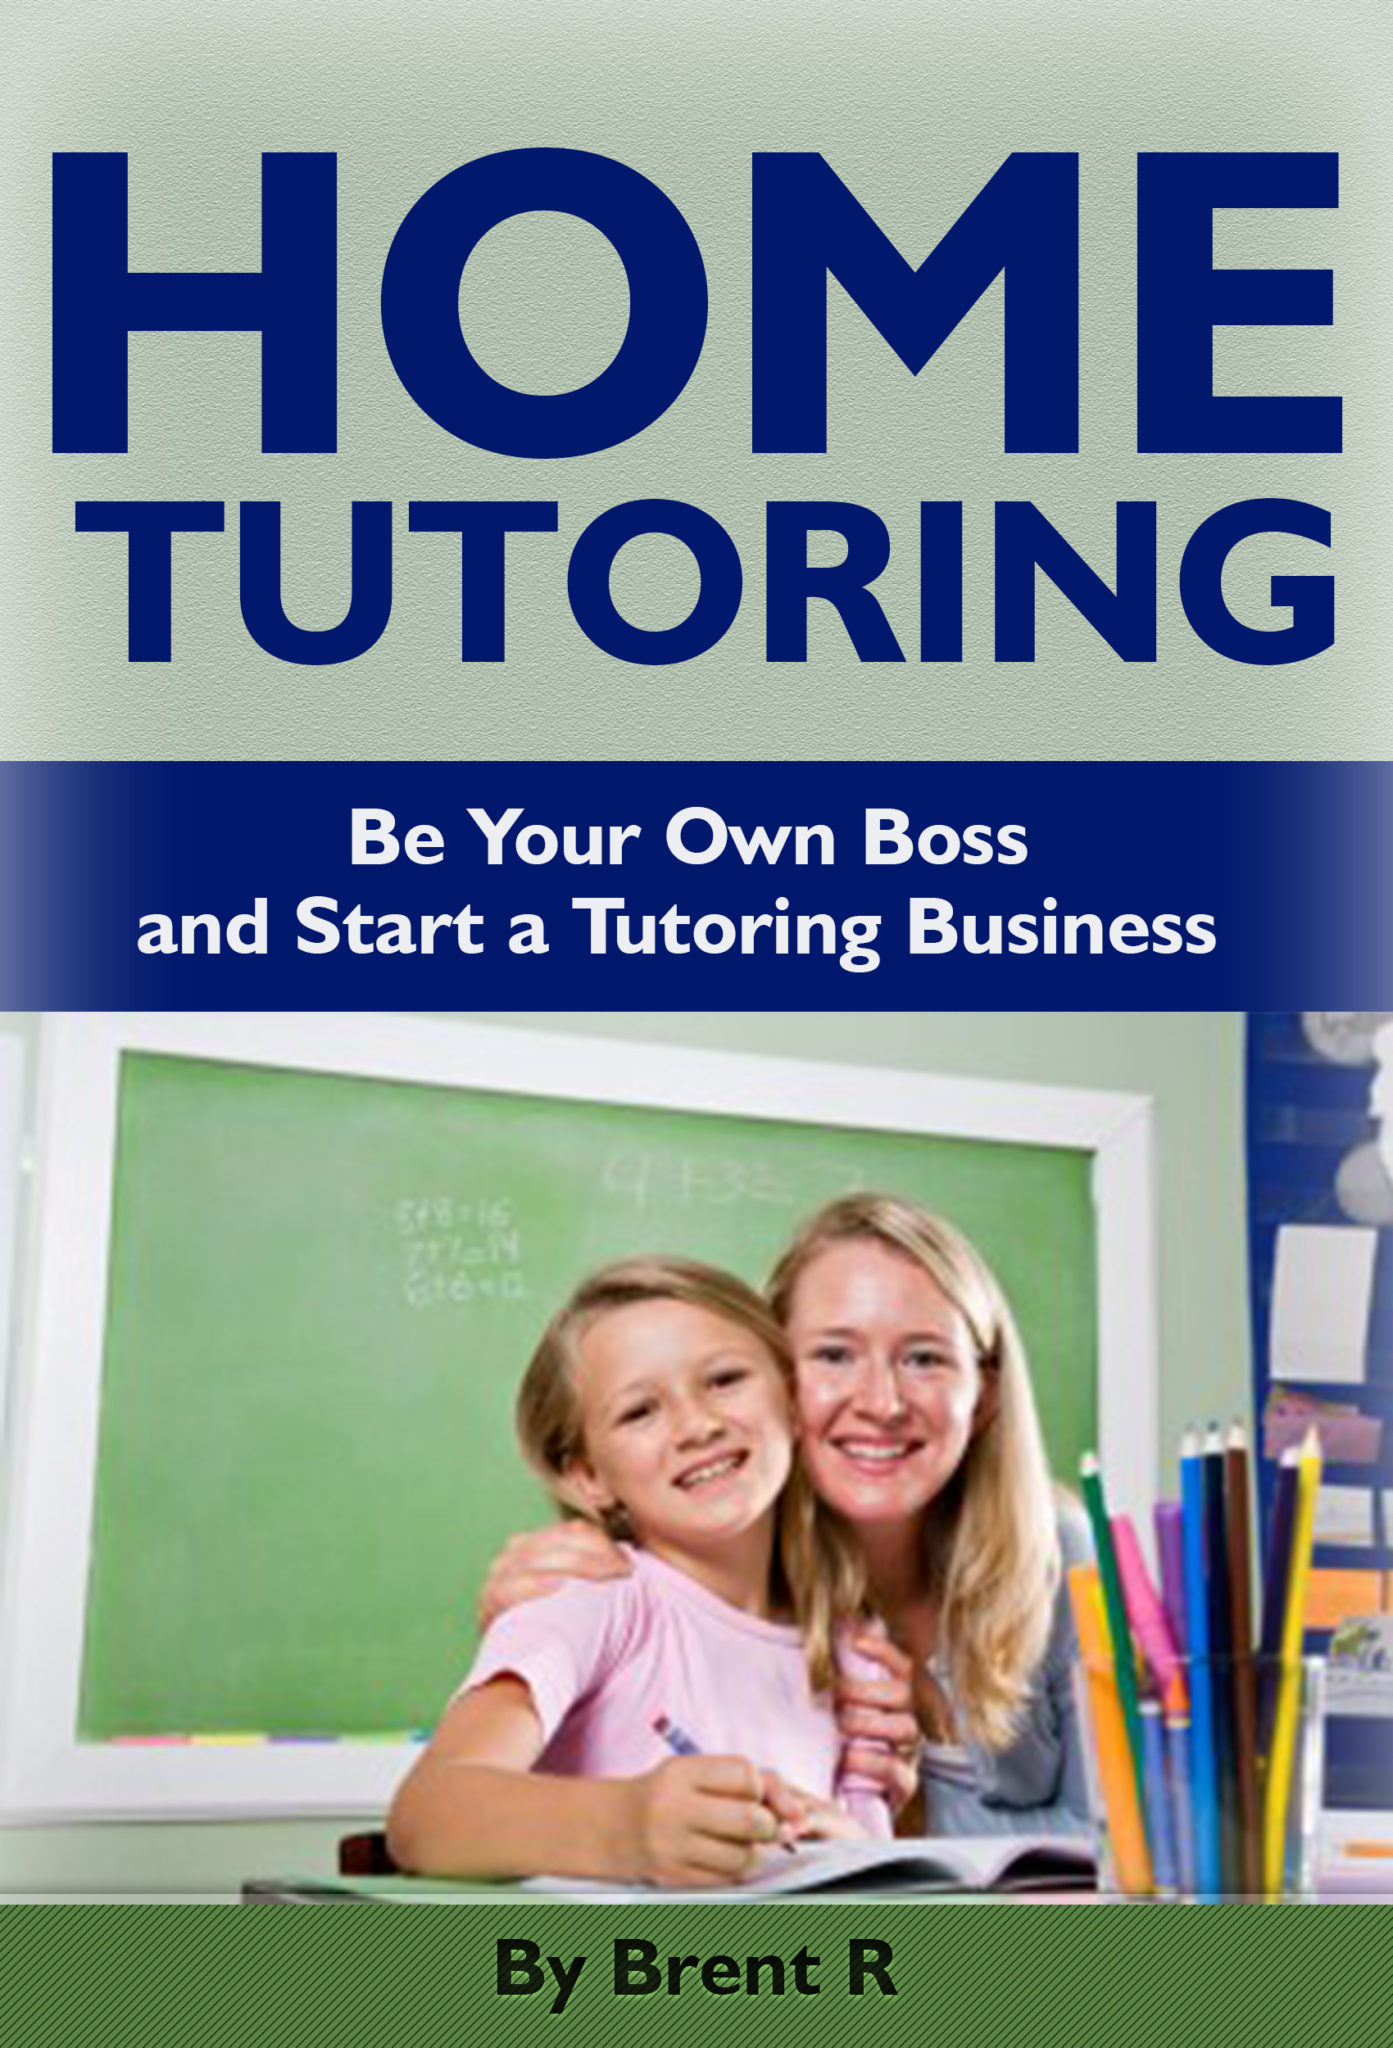 Home Tutoring: Be Your Own Boss and Start a Tutoring Business by Brent R